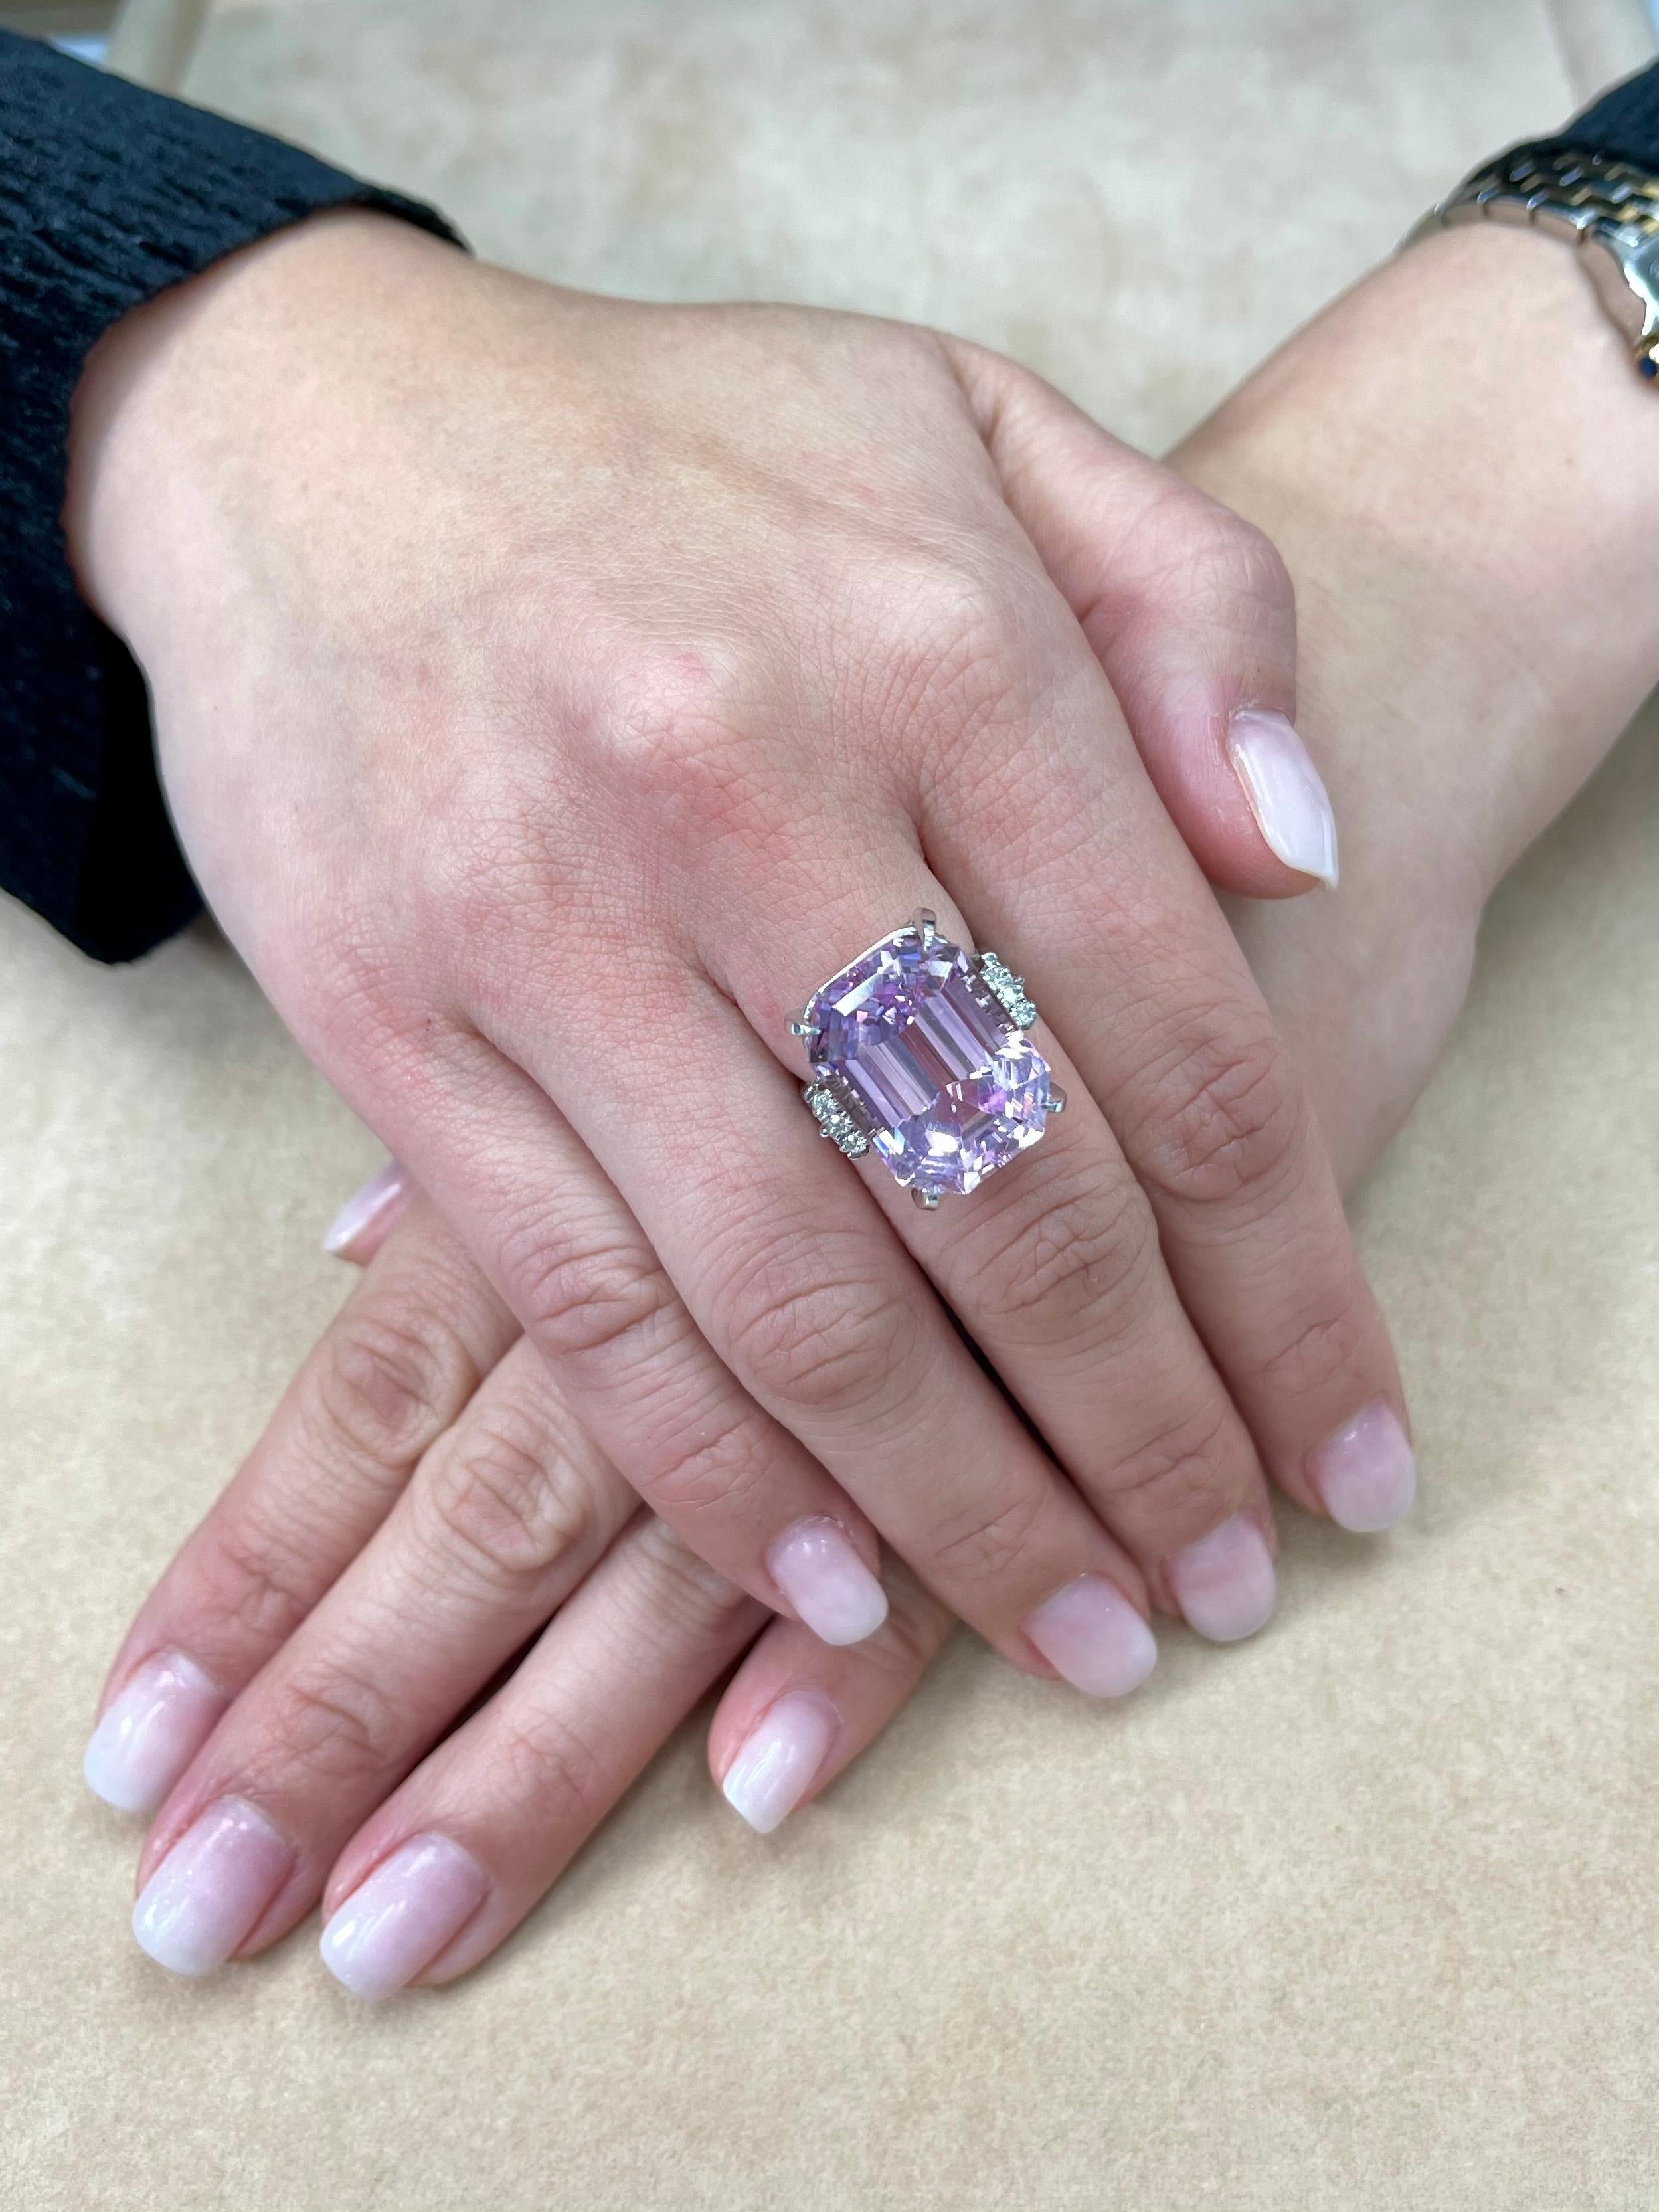 Please check out the HD video. The kunzite is a very nice pink! This Kuzite diamond cocktail ring will get you tons of compliments. Oversized at almost 22cts. The ring is set in platinum and diamonds. There are 0.10cts of diamonds used in this